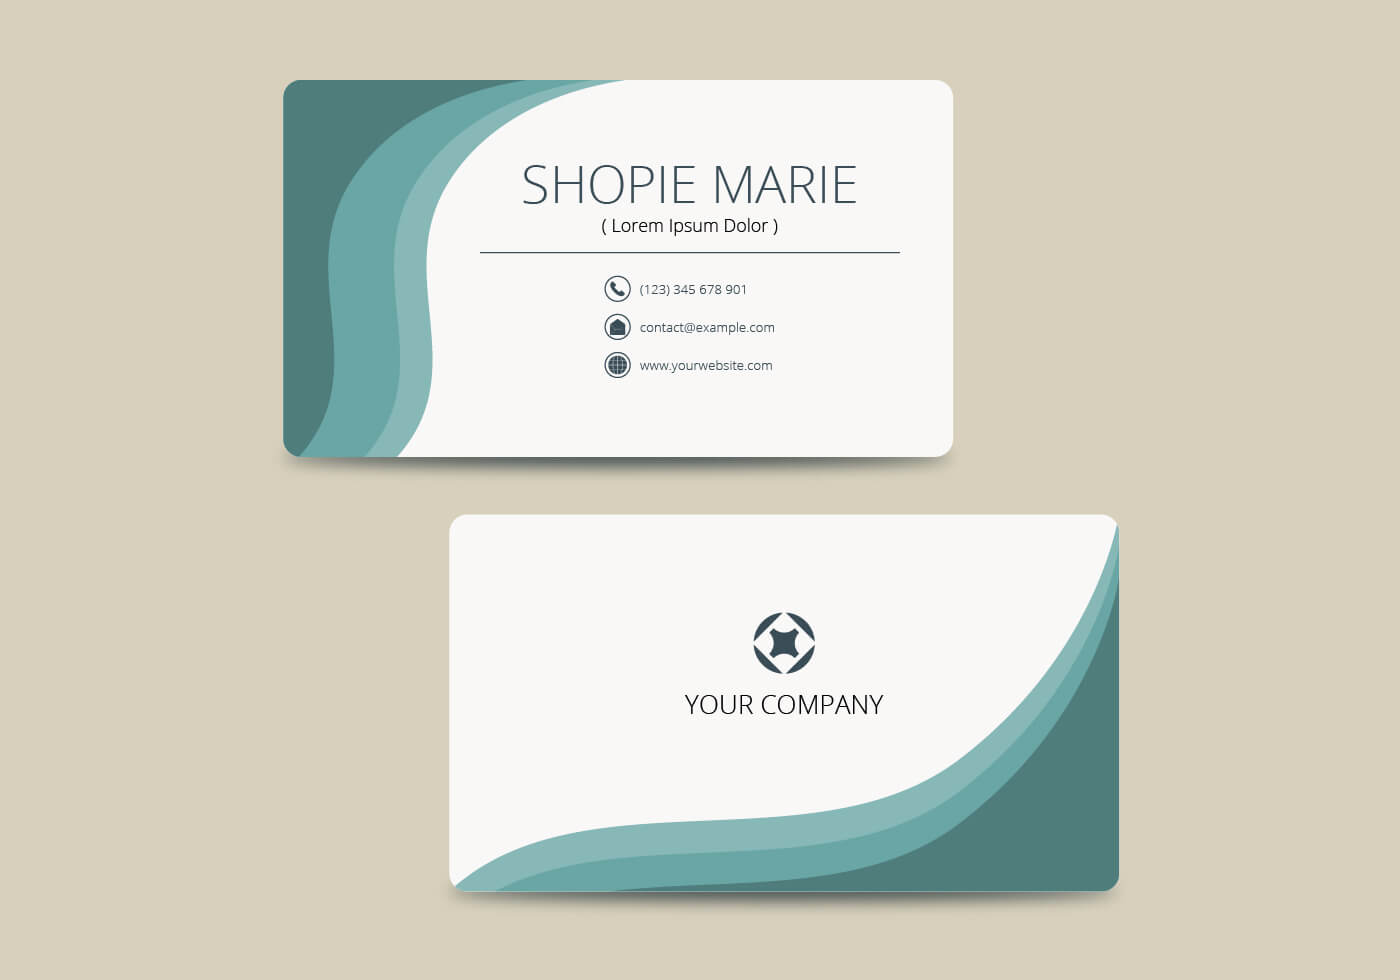 Teal Business Card Template Vector – Download Free Vectors Inside Buisness Card Templates